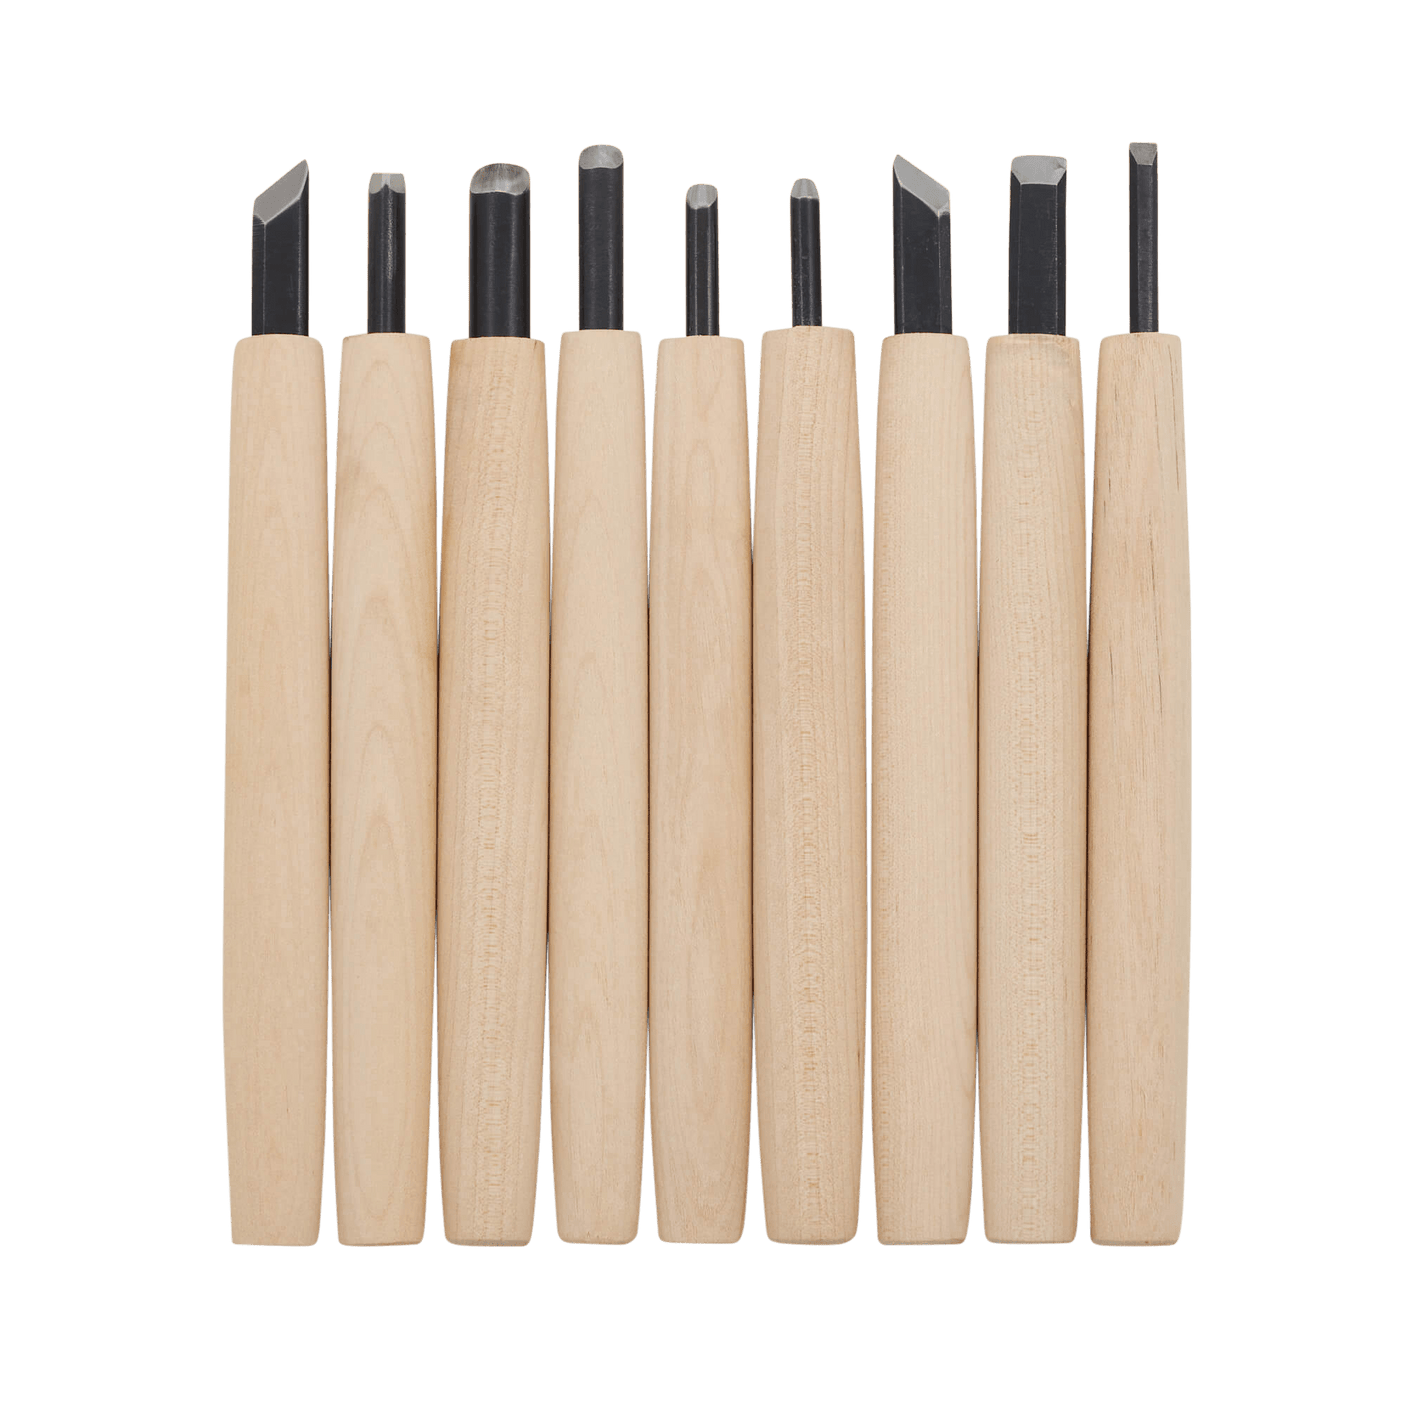 Carvy 9 Piece Carving Set - Carving Sets - Japanese Tools Australia